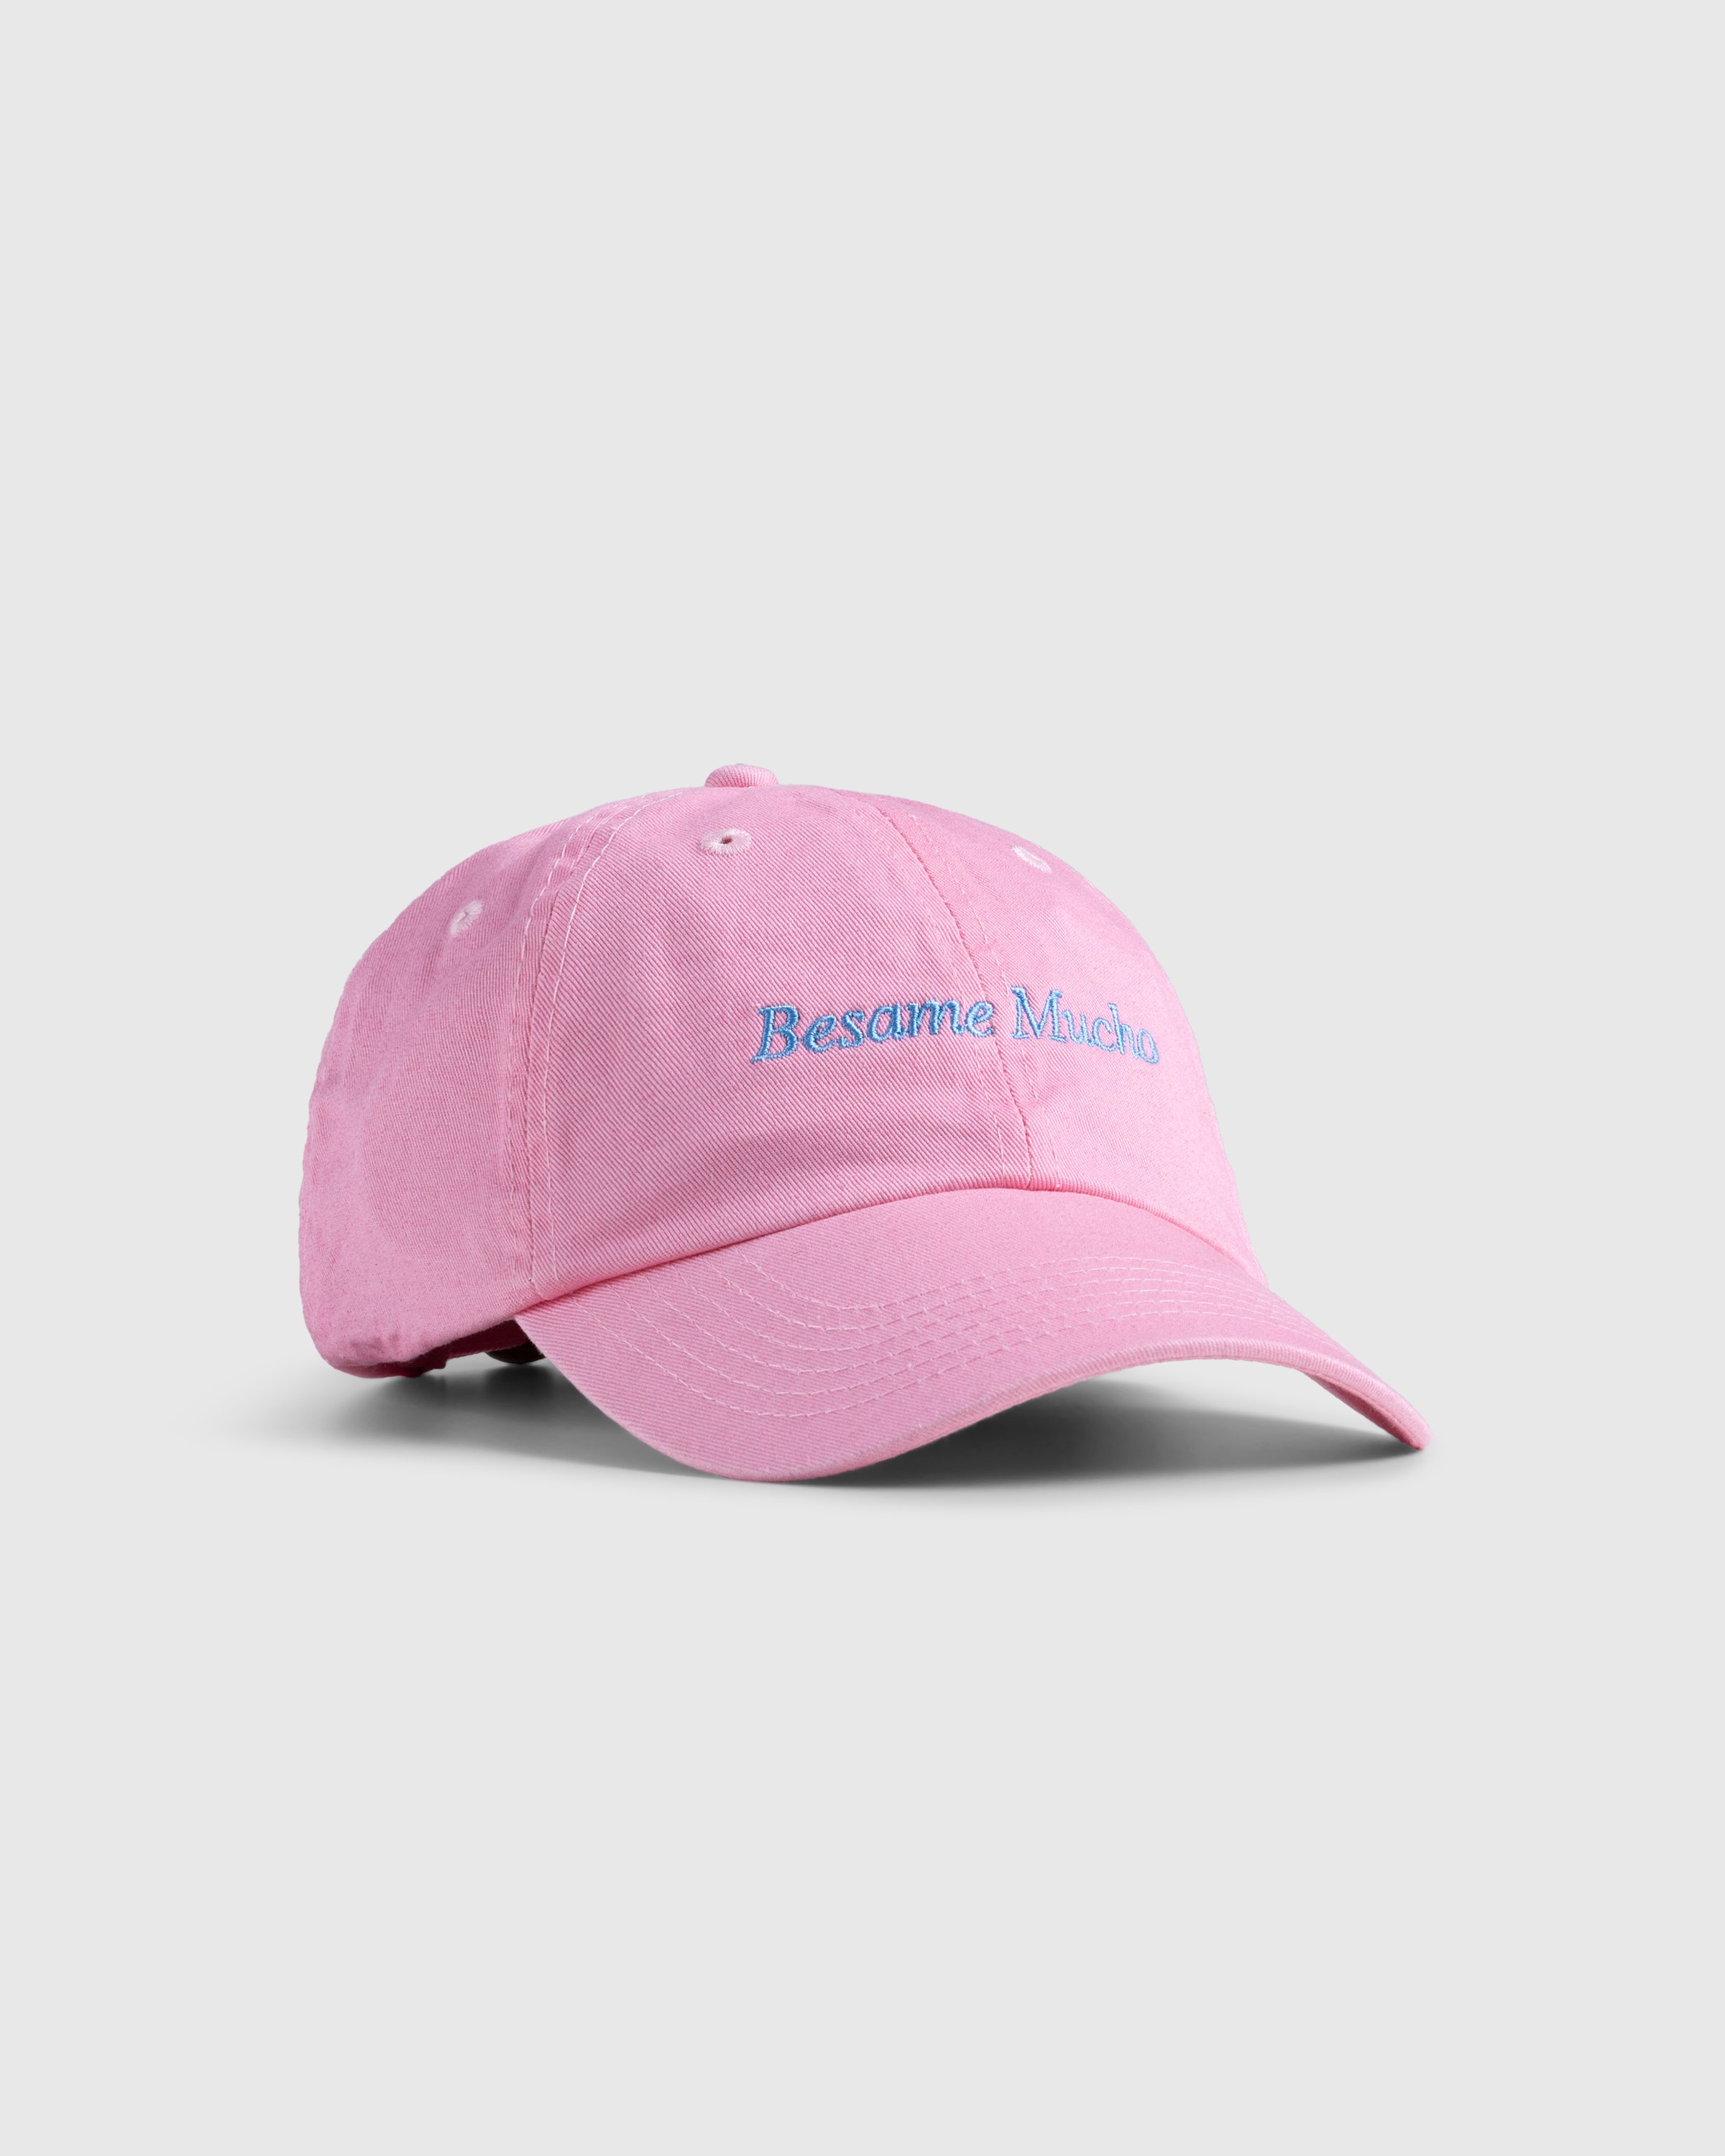 HO HO COCO - BESAME MUCHO PINK X LT BLUE - Accessories - Pink - Image 1